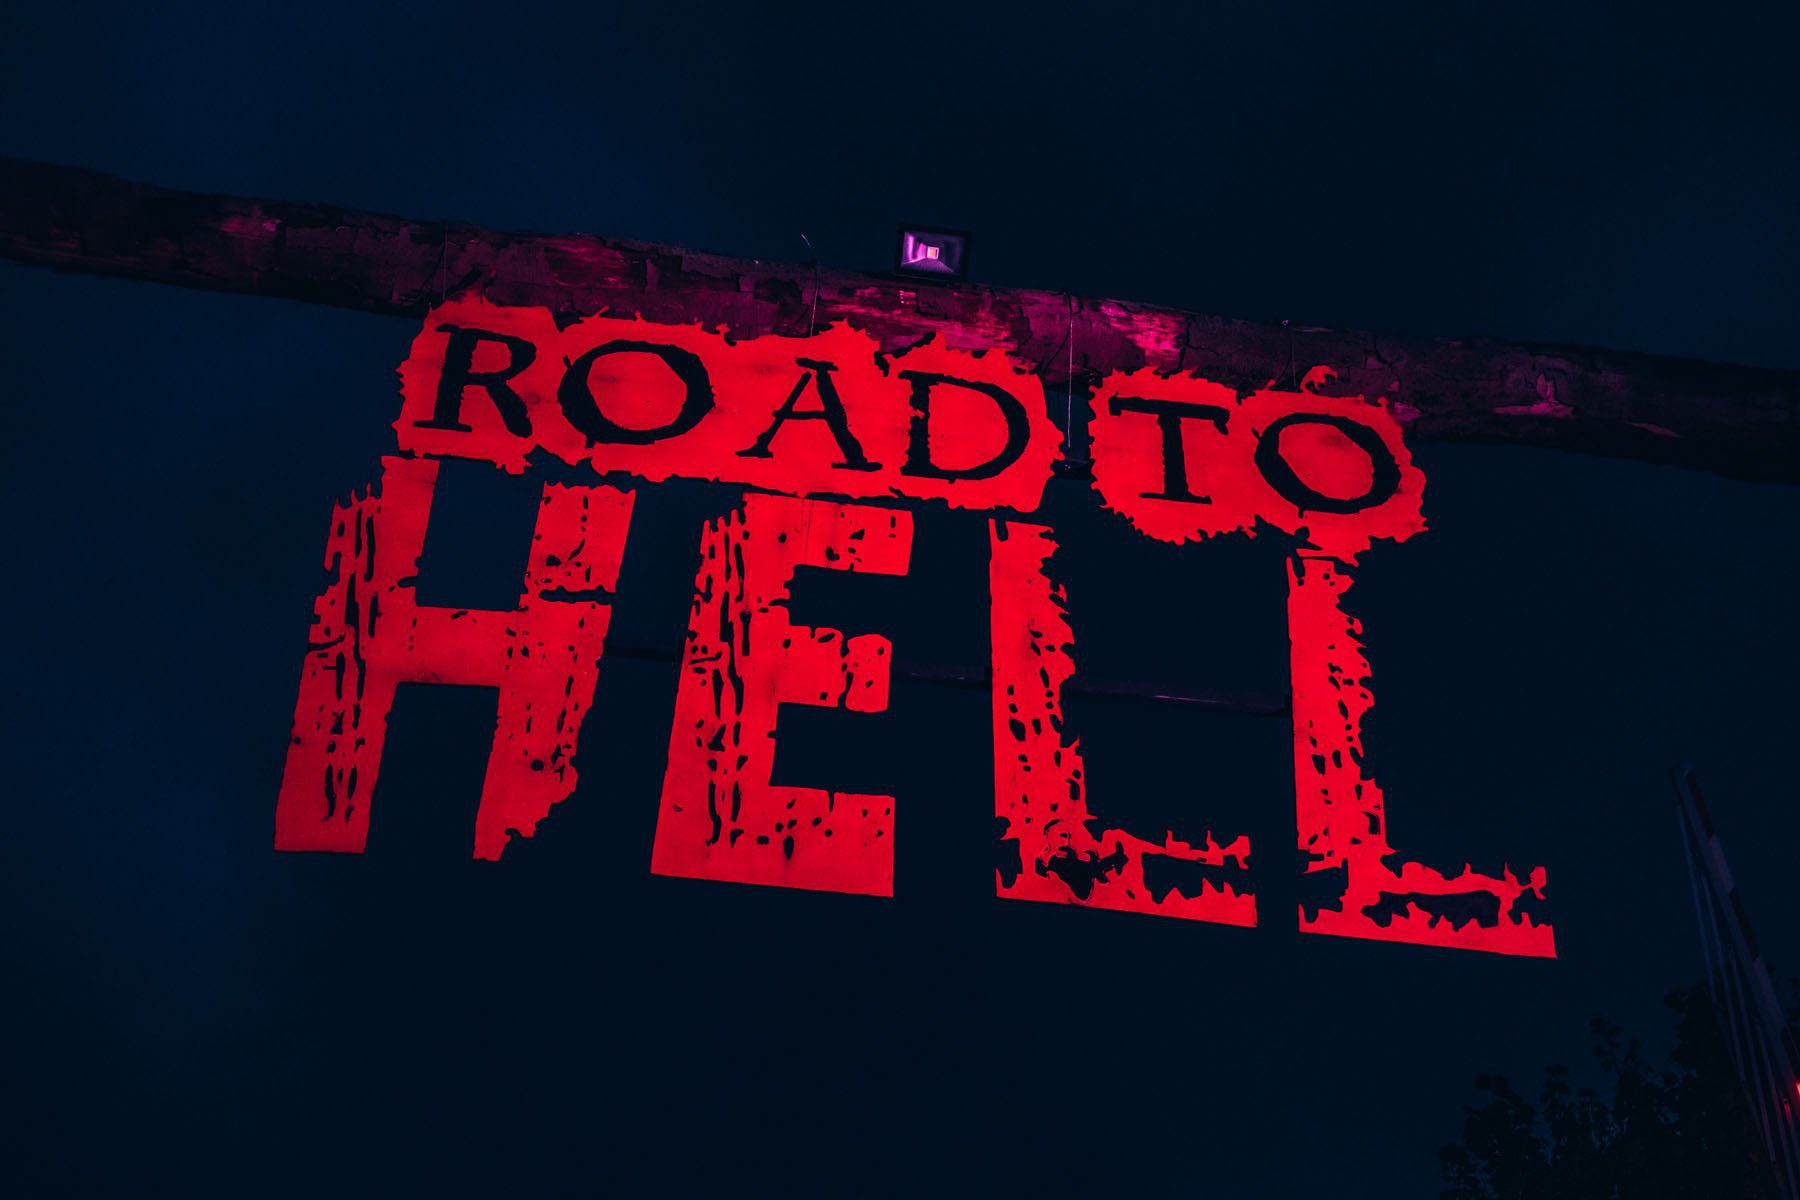 ROAD TO HELL SHOW SCARE AWARDS